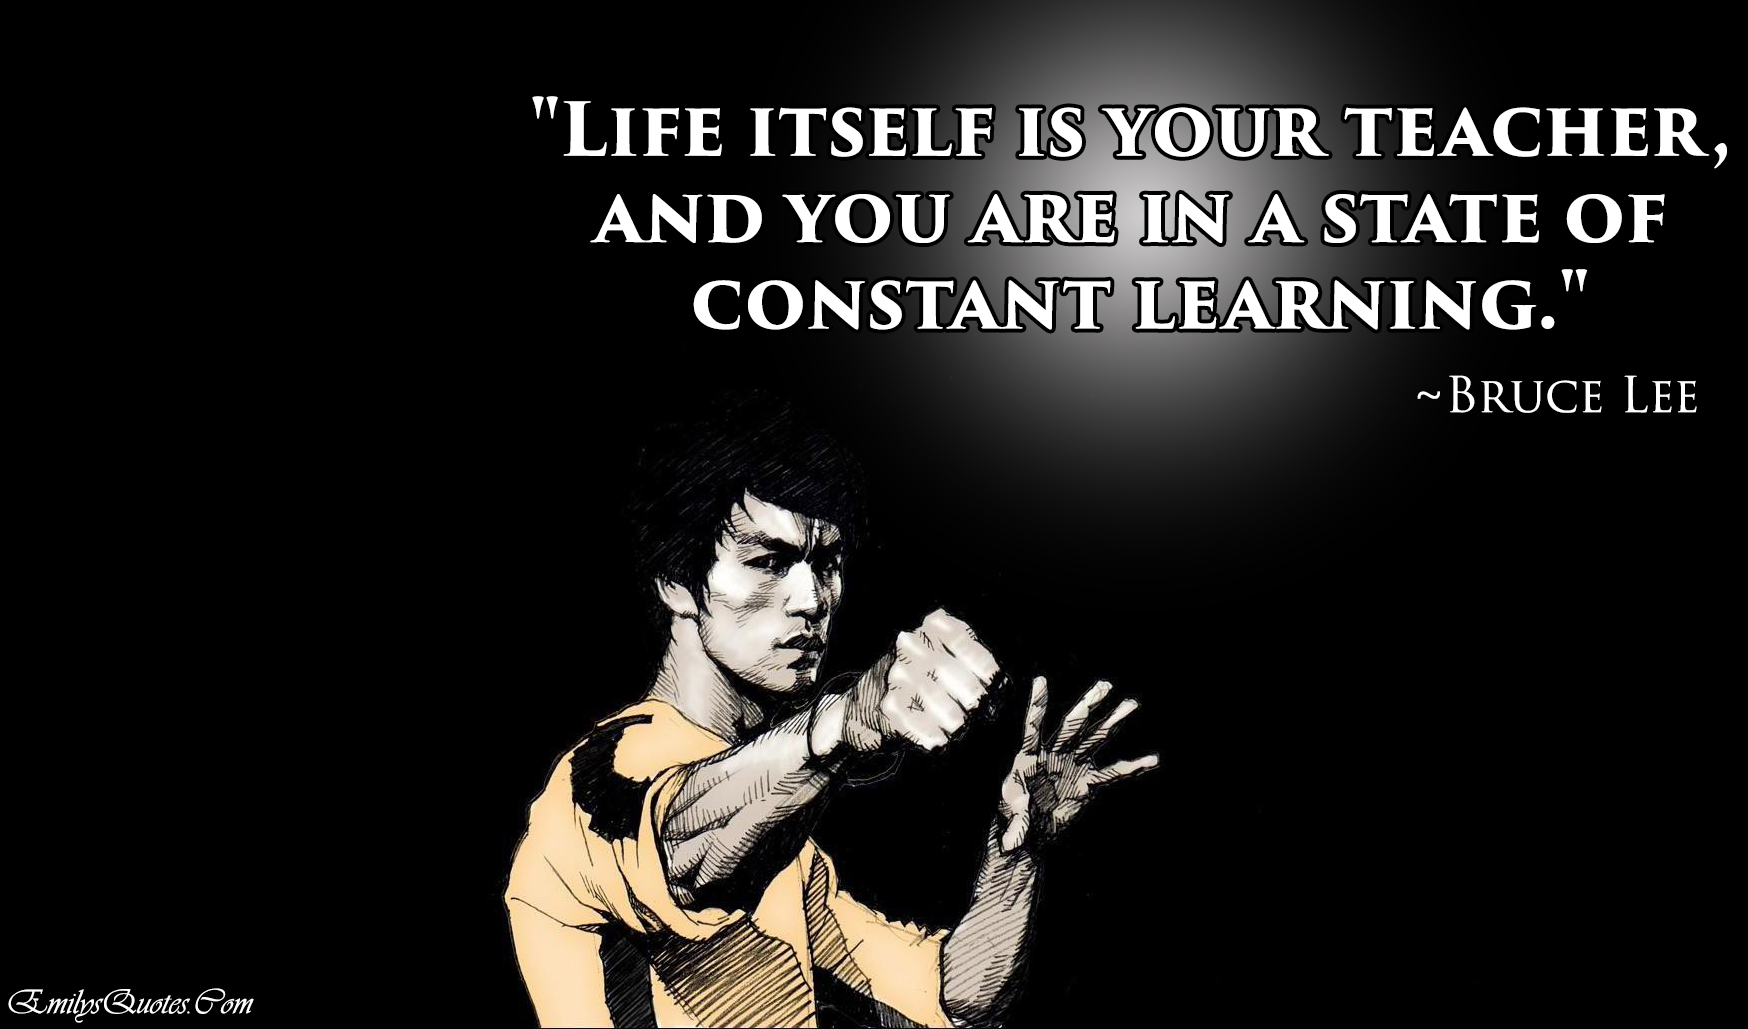 Life itself is your teacher, and you are in a state of constant learning